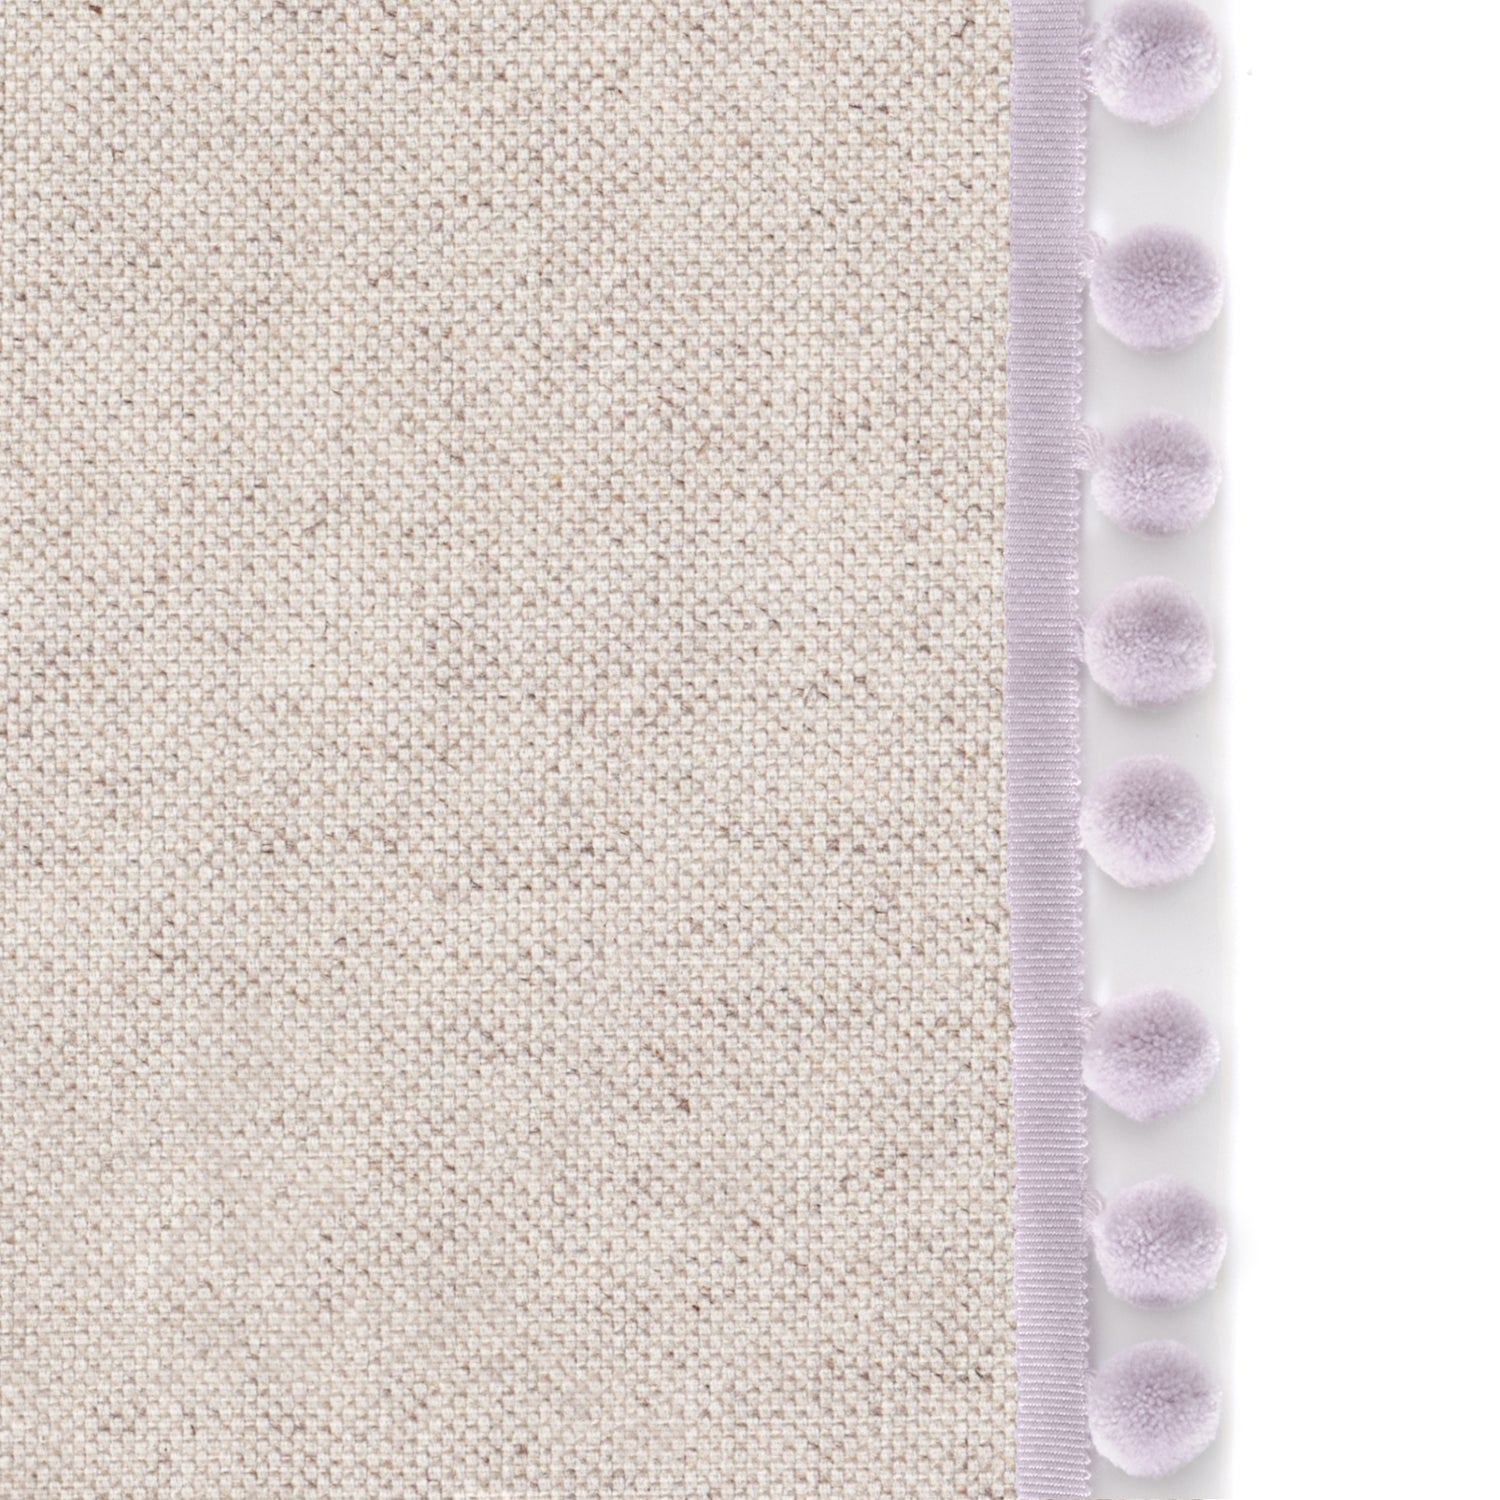 Upclose picture of Oat custom Linen Oatcurtain with lilac pom pom trim